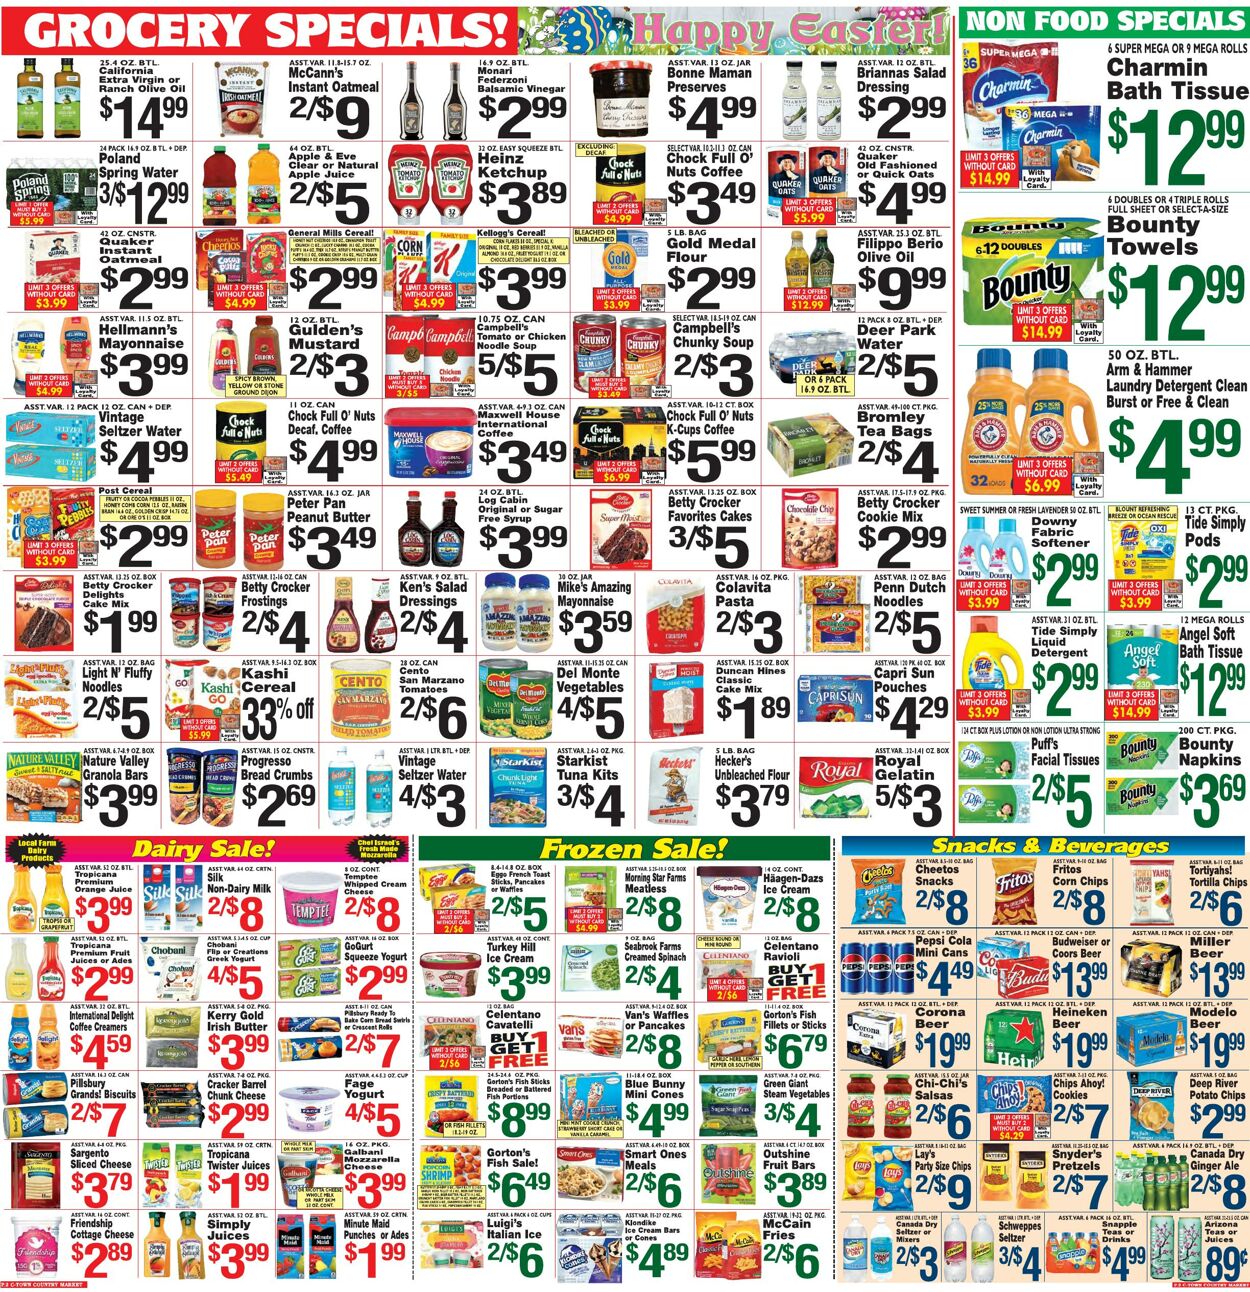 Weekly ad Country Markets of Westchester 03/15/2024 - 03/21/2024